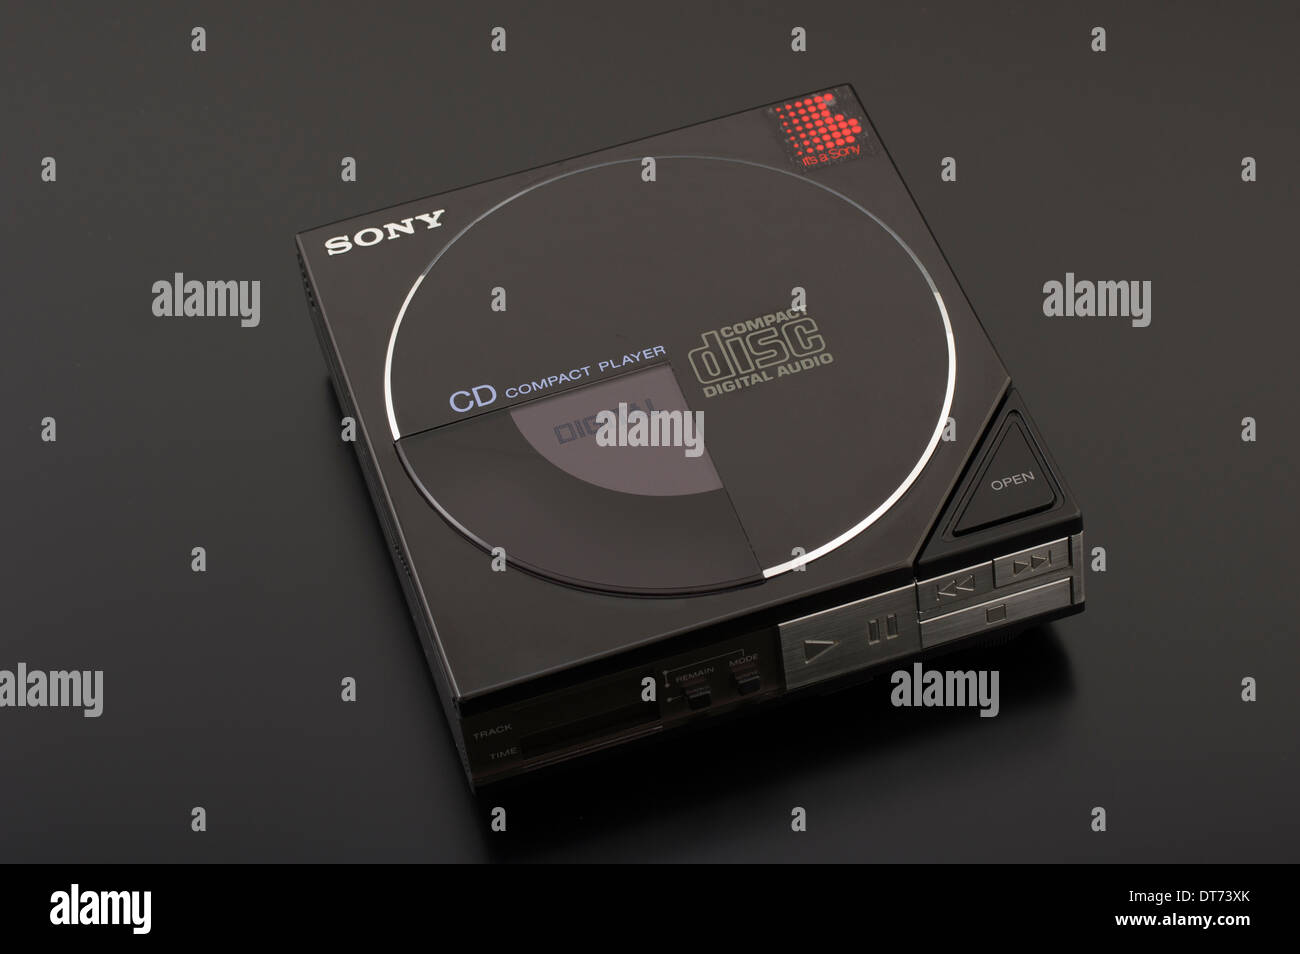 Sony Portable Compact Disc Player D-5 First Discman Stock Photo